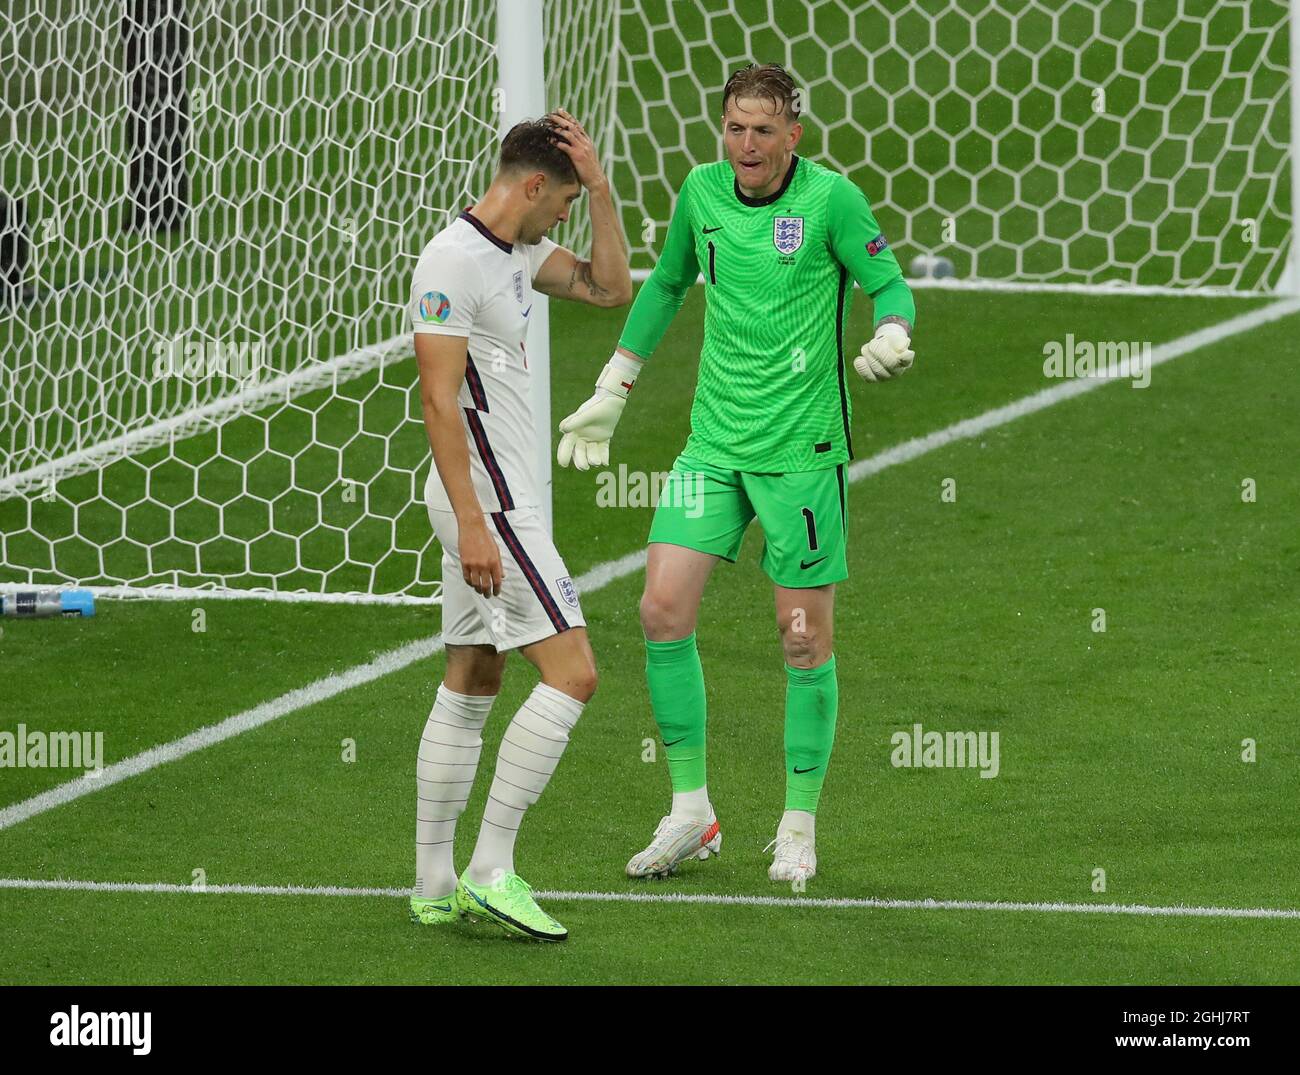 London, England, 18th June 2021. Jordan Pickford of England exchanges words with John Stones of England  during the UEFA European Championships match at Wembley Stadium, London. Picture credit should read: David Klein / Sportimage via PA Images Stock Photo